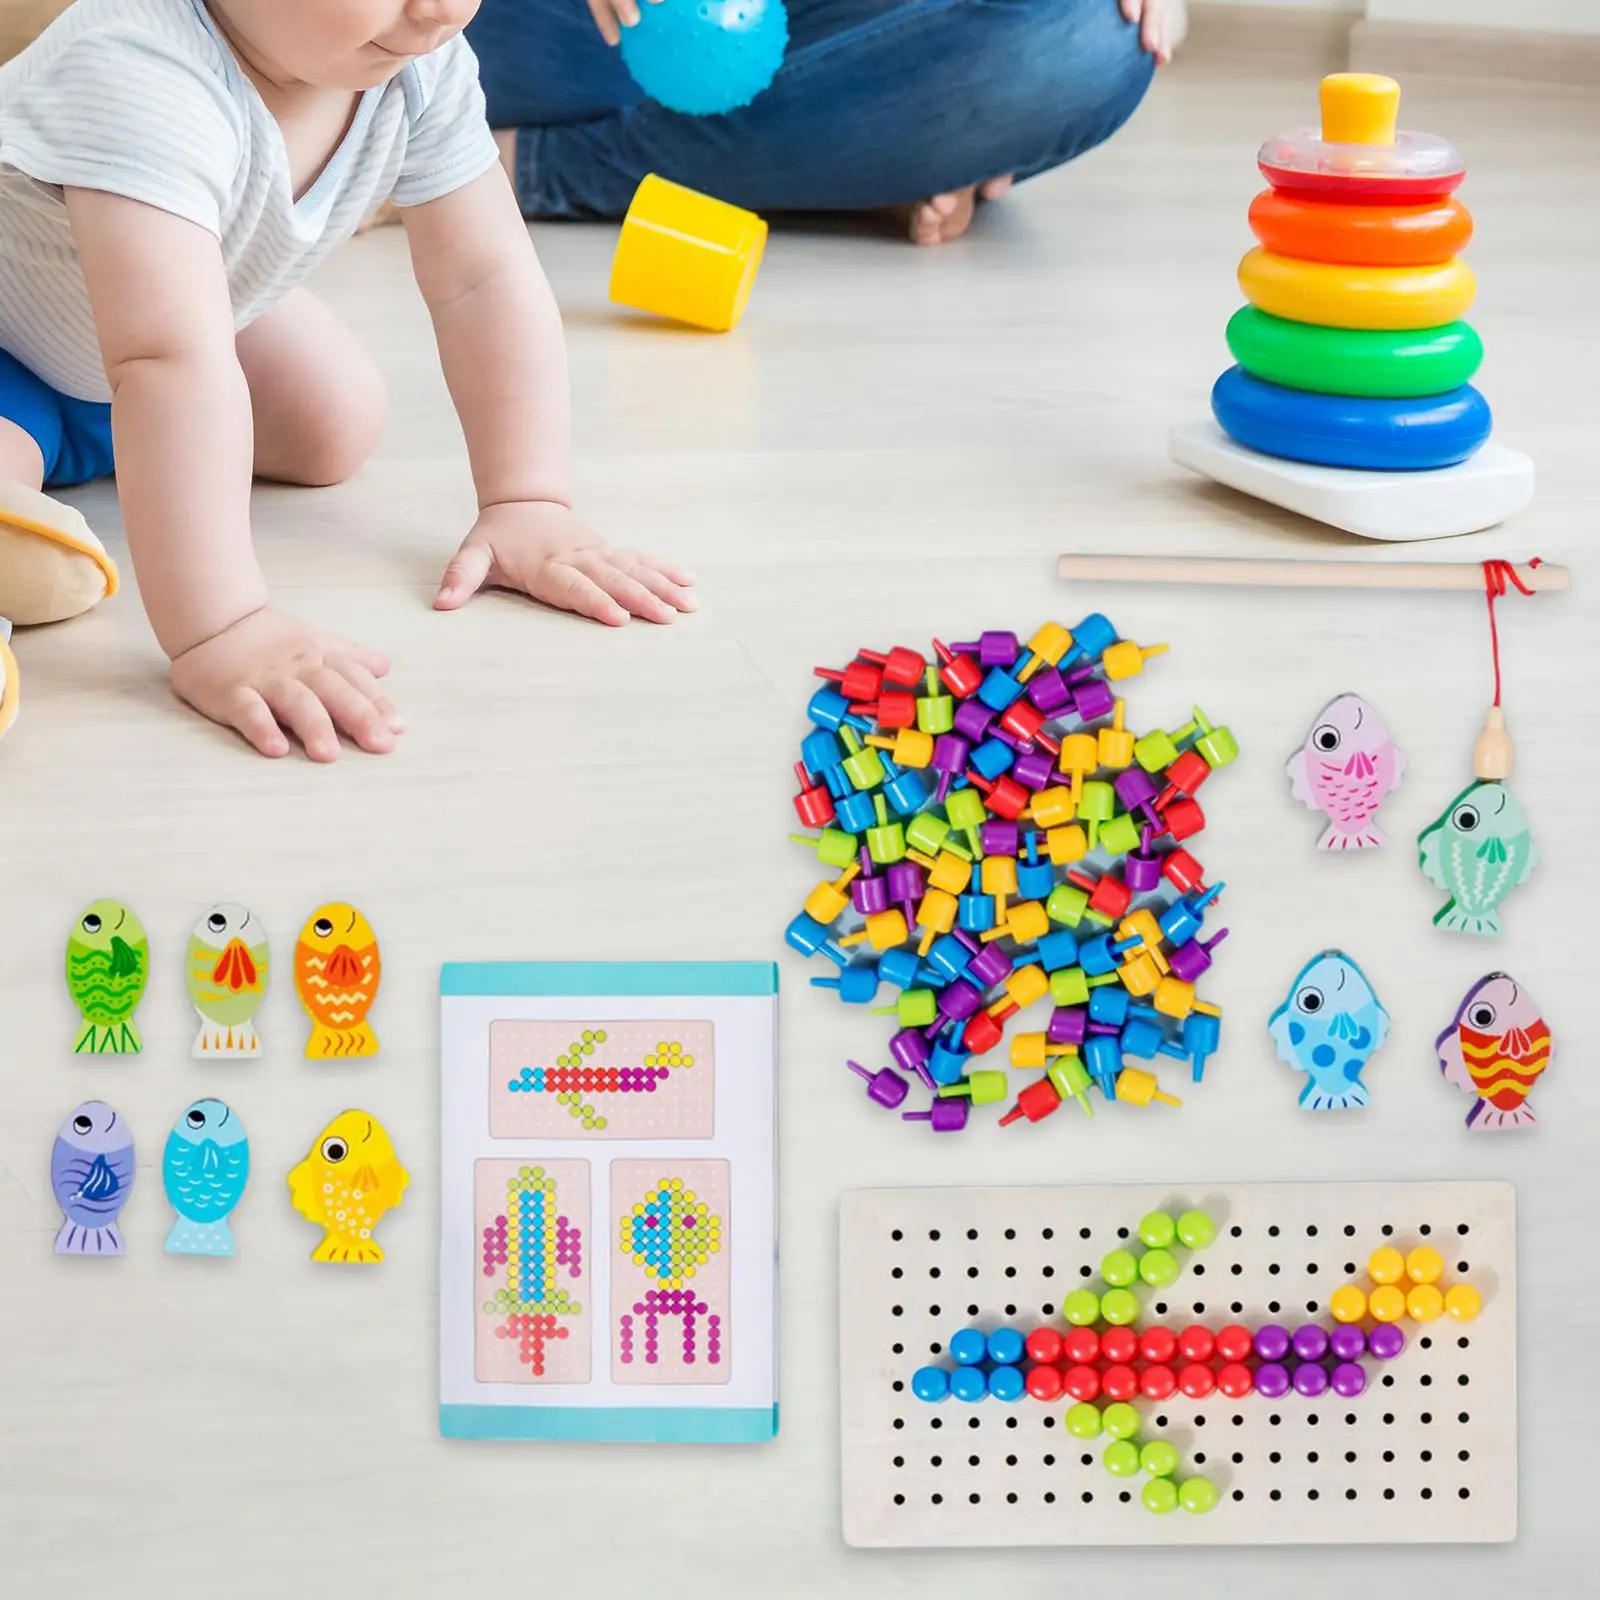 Fishing Board Game Developmental Toy Novelty Develop Fine Motor Skill Fishing Toys for Boys Girls Toddlers Kids Holiday Gifts